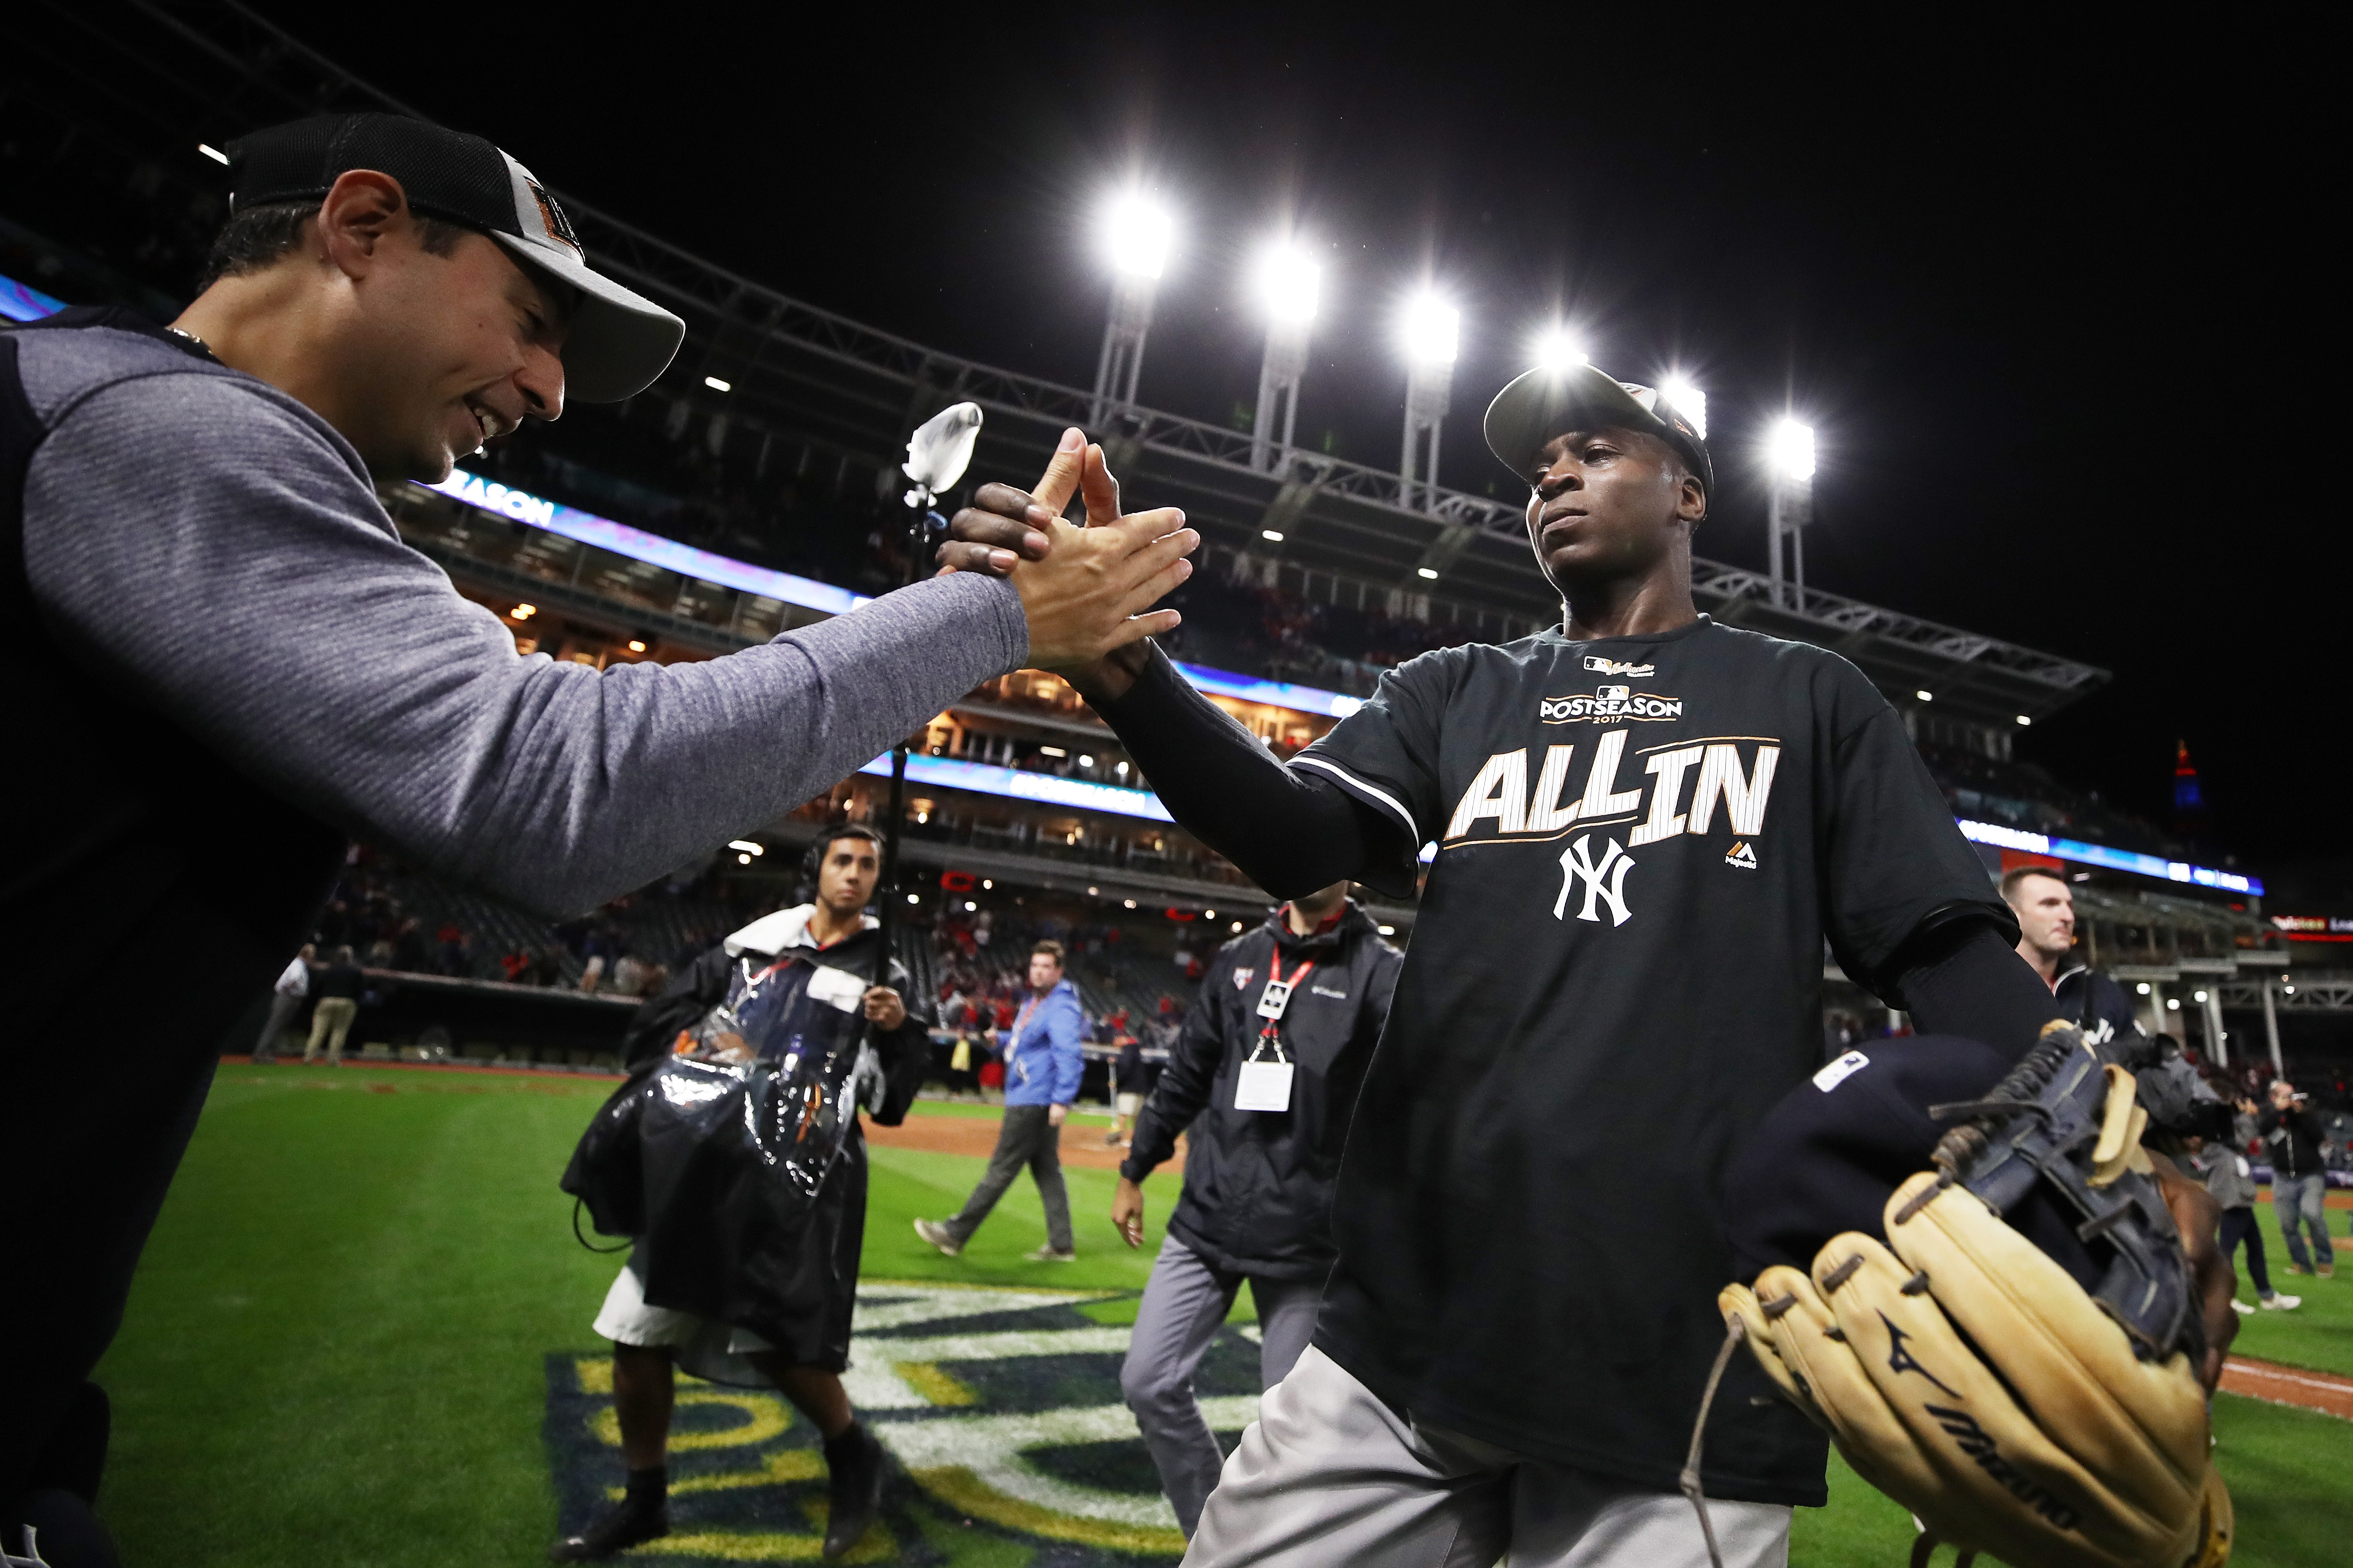 Didi Gregorius on pace to do something Derek Jeter never did … win